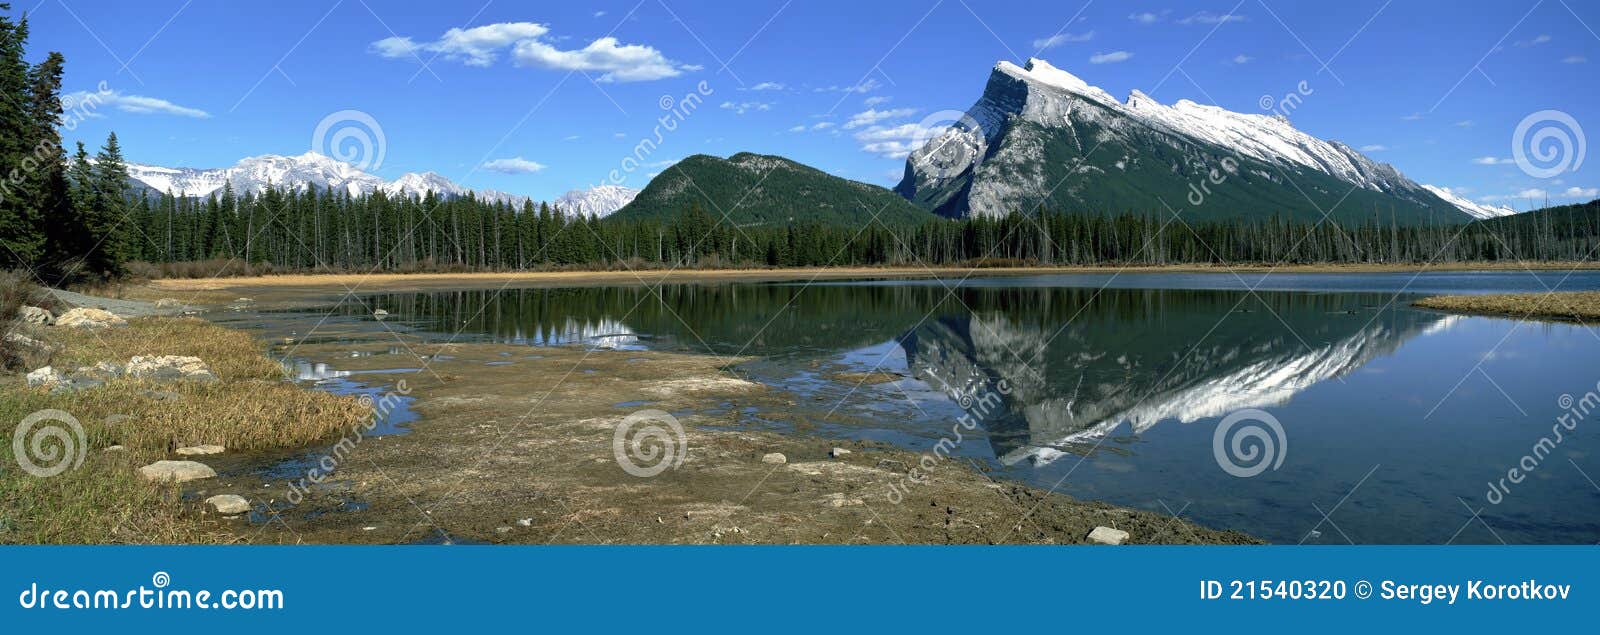 panoramic view on canadian rockies mountains